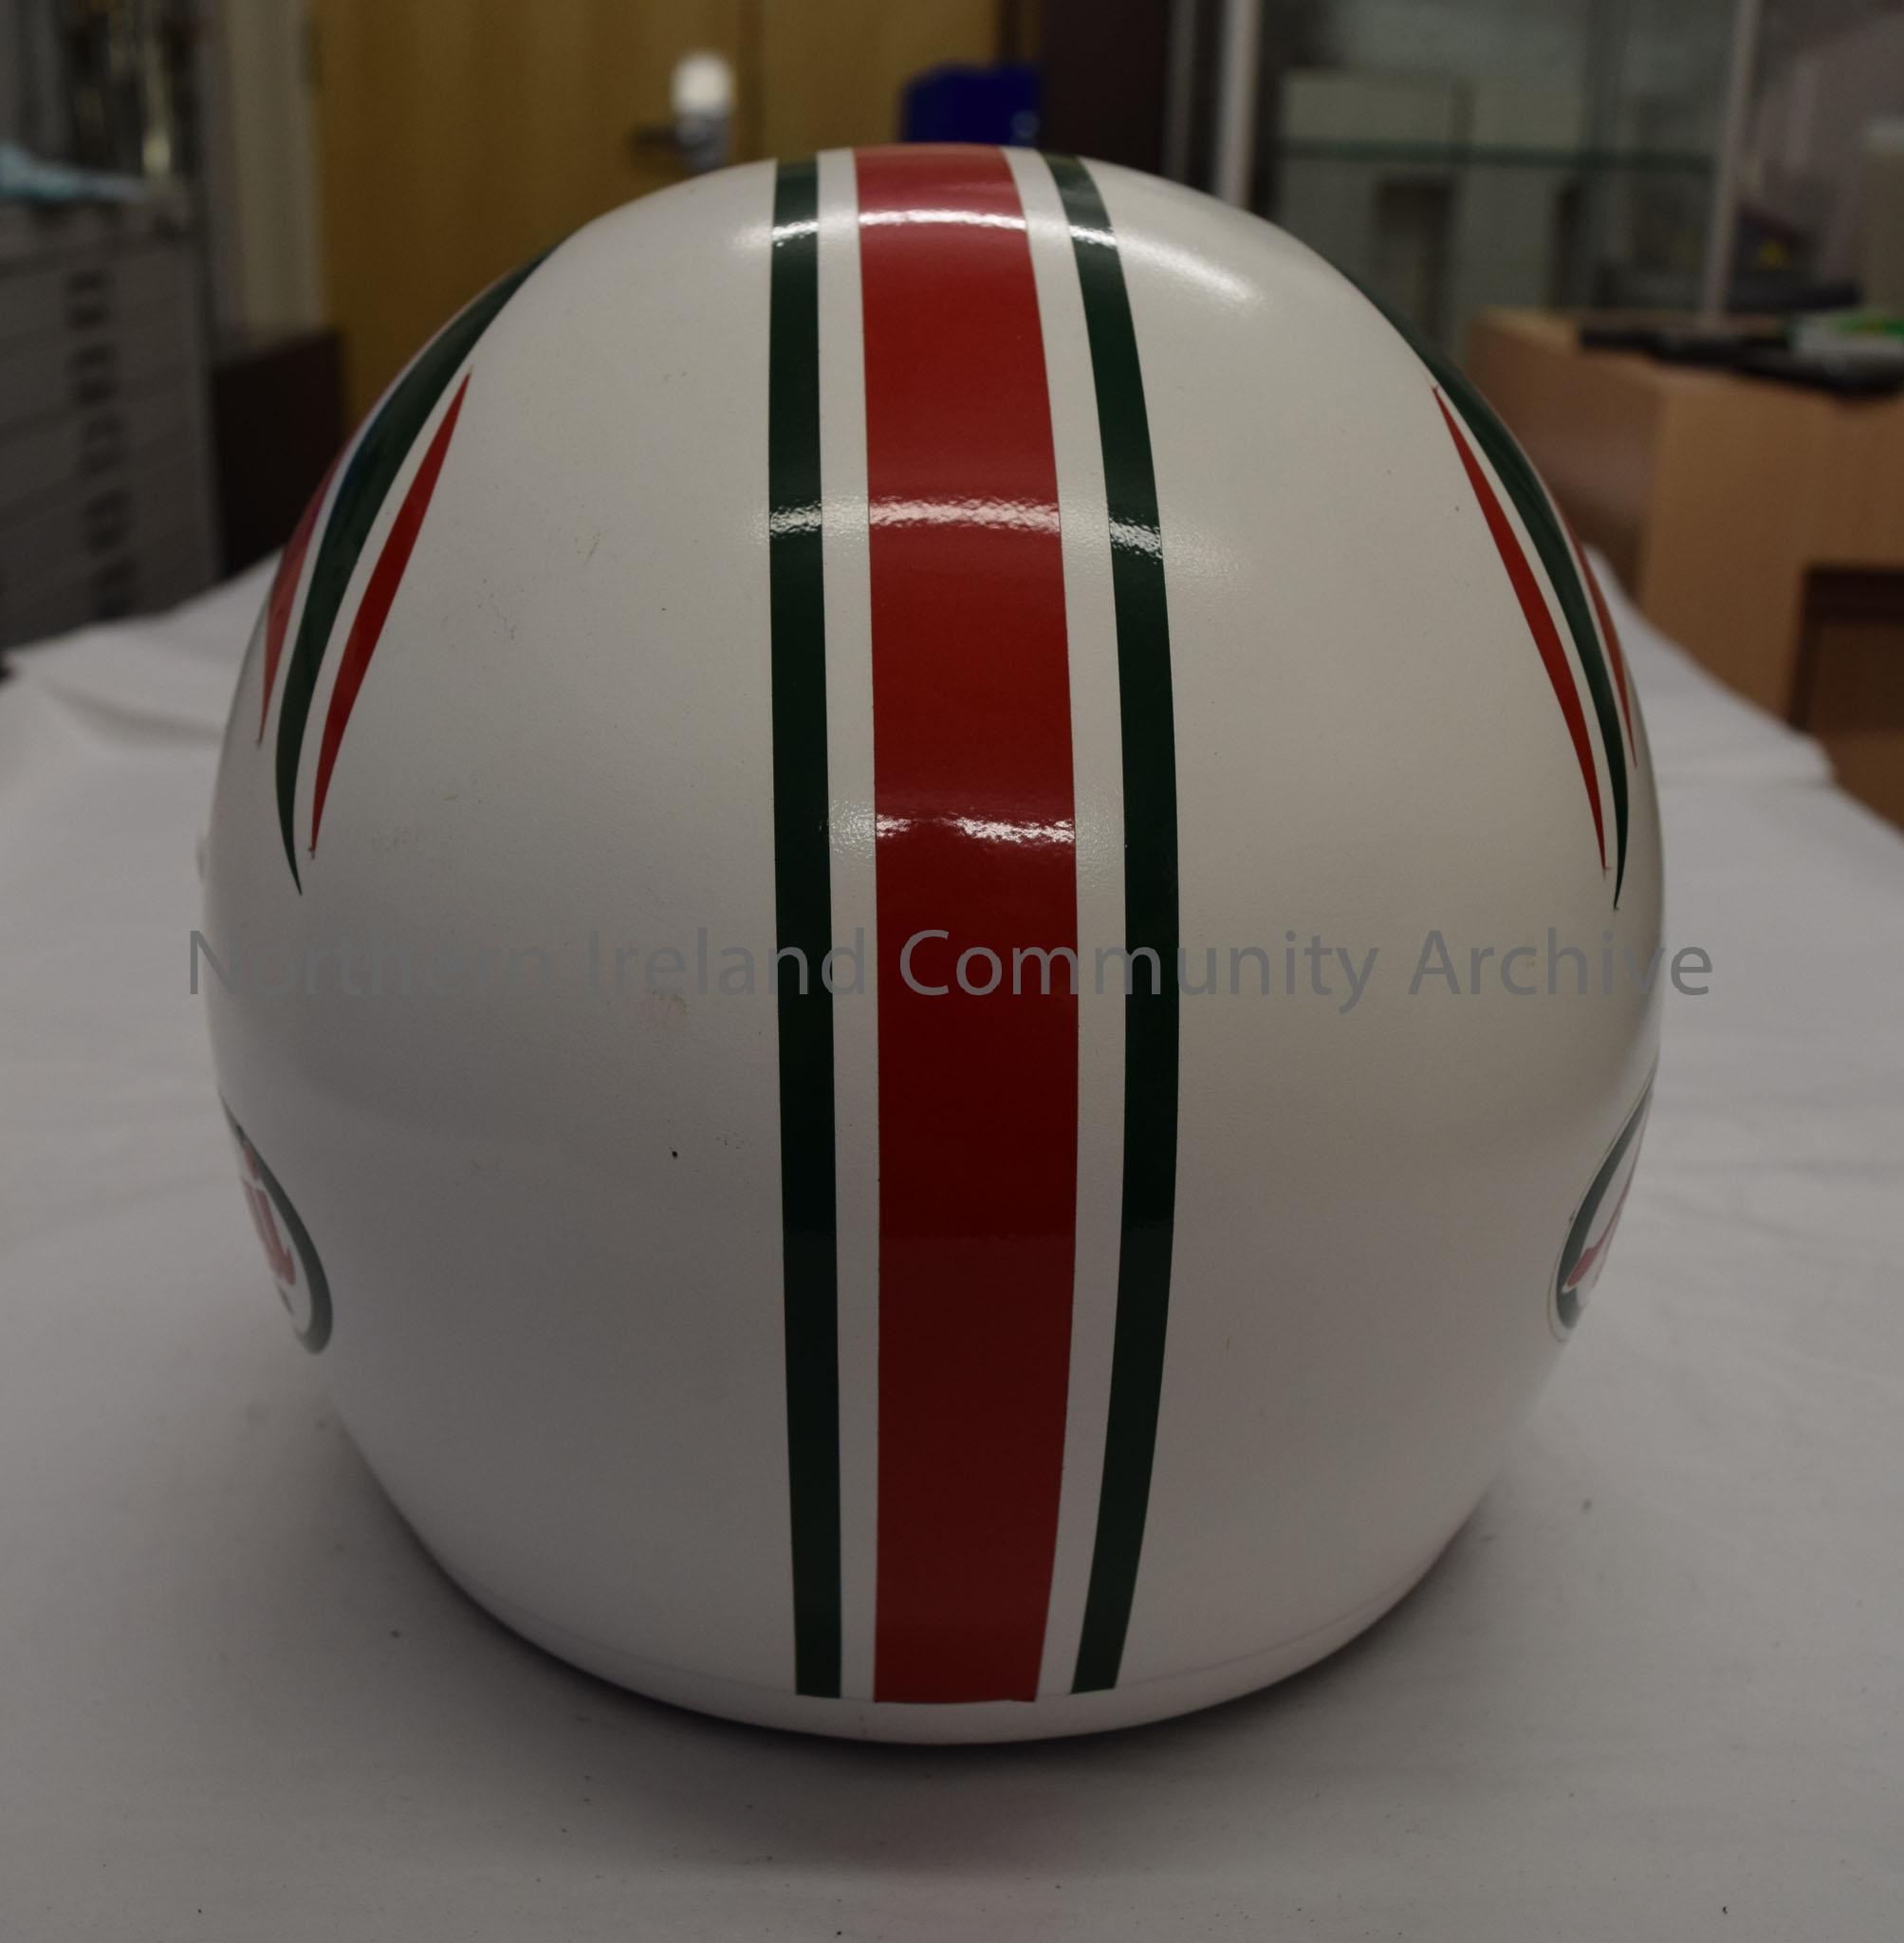 Arai motorcycle helmet belonging to Owen McNally. White helmet with red and green stripes down the middle and a red and green pattern on the sides. – 2016.82 (4)